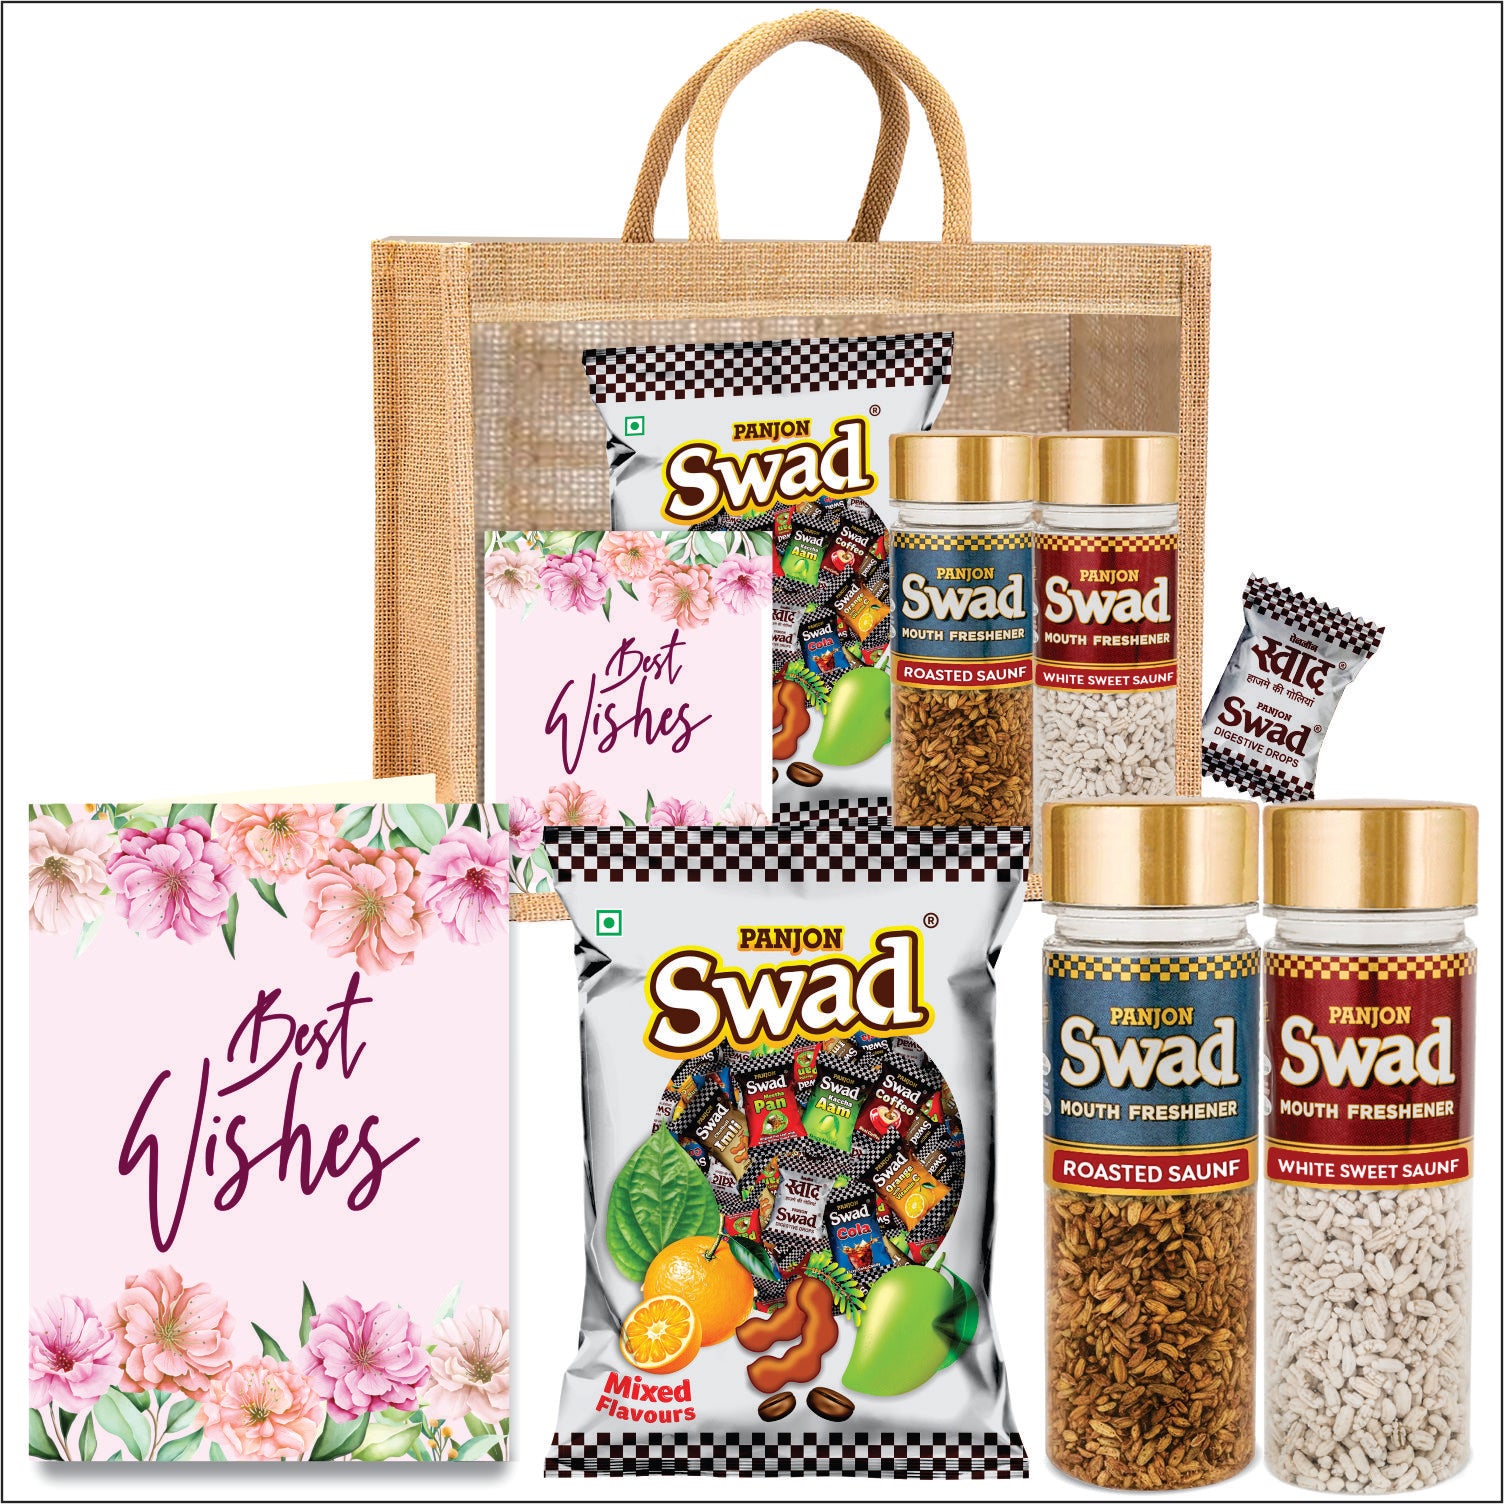 Swad Best Wishes Gift Hamper Set (Mixed Toffee & Rosted Saunf & White Sweet Saunf Pachak Mukhwas Mouthfreshener, 25 Candy & 2 bottle) with Greeting Card & Jute Bag,Gift Item